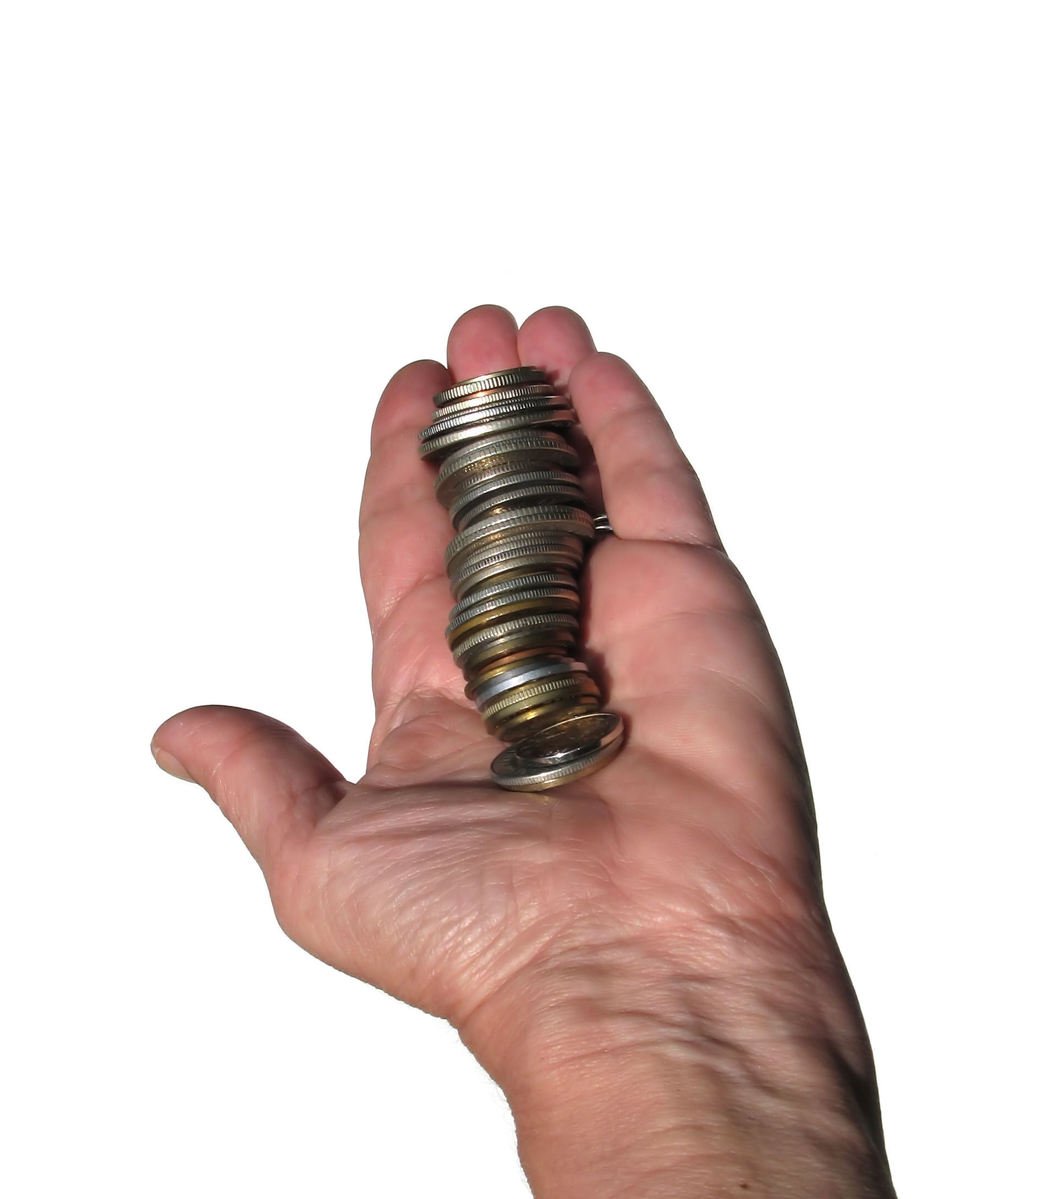 a person's hand holding up a pile of coins